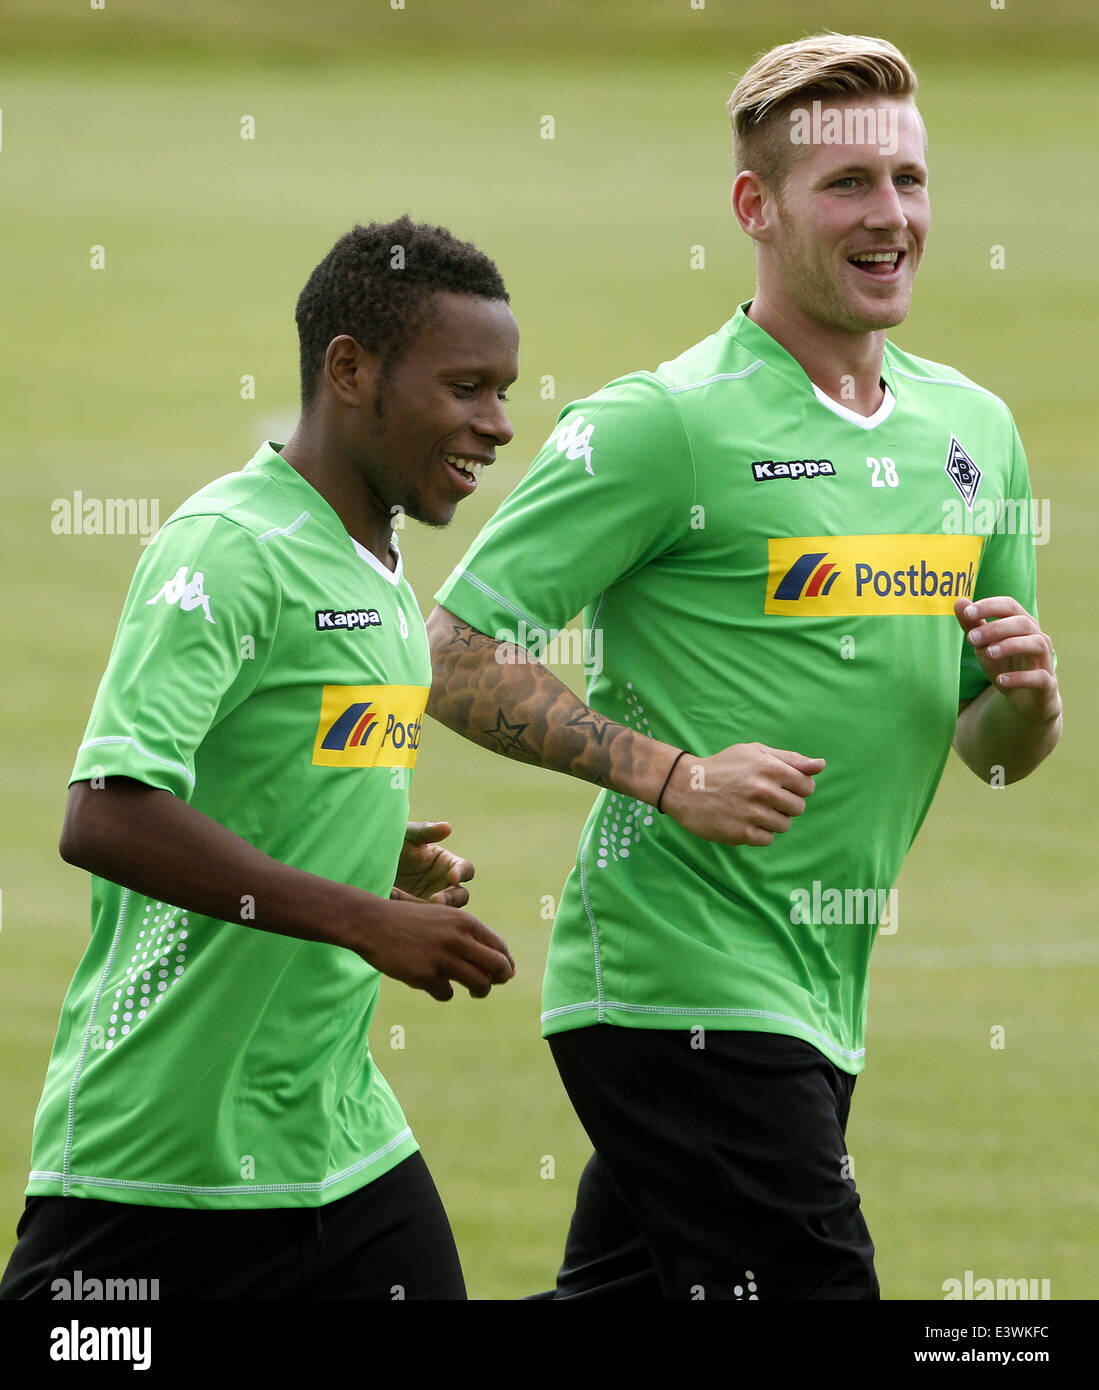 Moenchengladbach, Germany. 30th June, 2014. New players of Bundesliga soccer club Borussia Moenchengladbach, Ibrahima Traore (L) and Andre Hahn, attend the first preseason training of their team in Moenchengladbach, Germany, 30 June 2014. Photo: ROLAND WEIHRAUCH/DPA/Alamy Live News Stock Photo